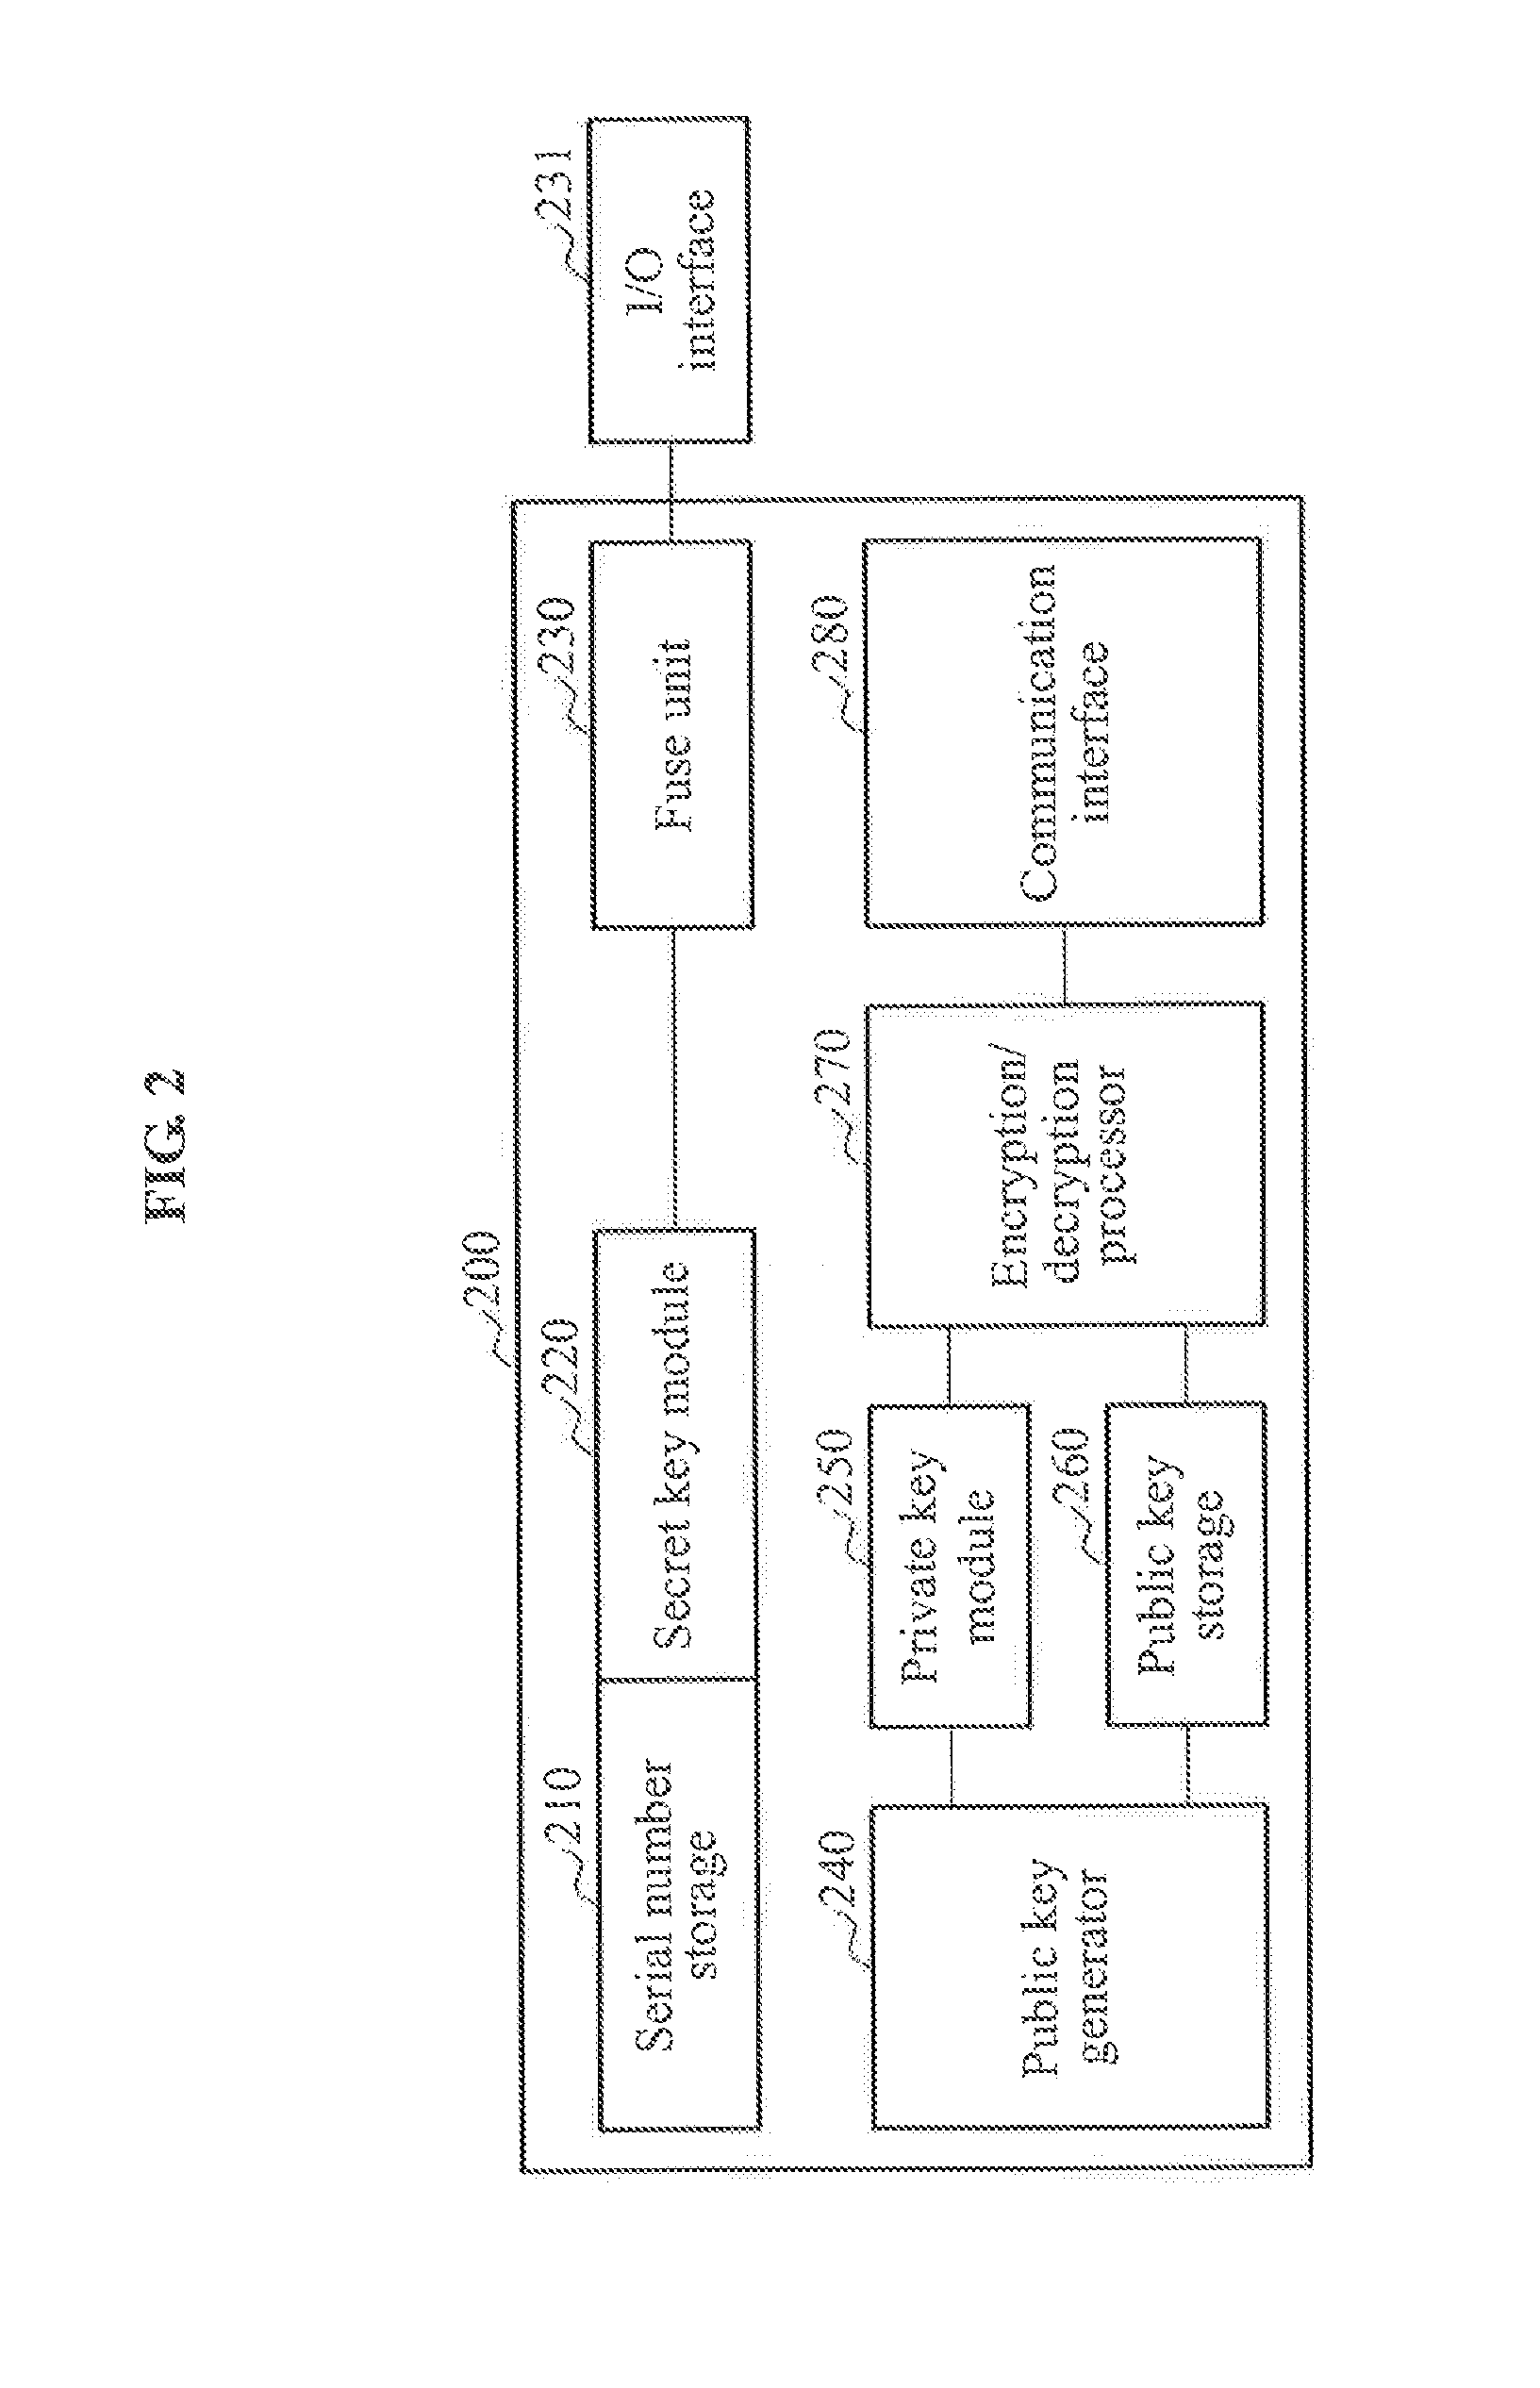 Apparatus and method for authentication between devices based on puf over machine-to-machine communications